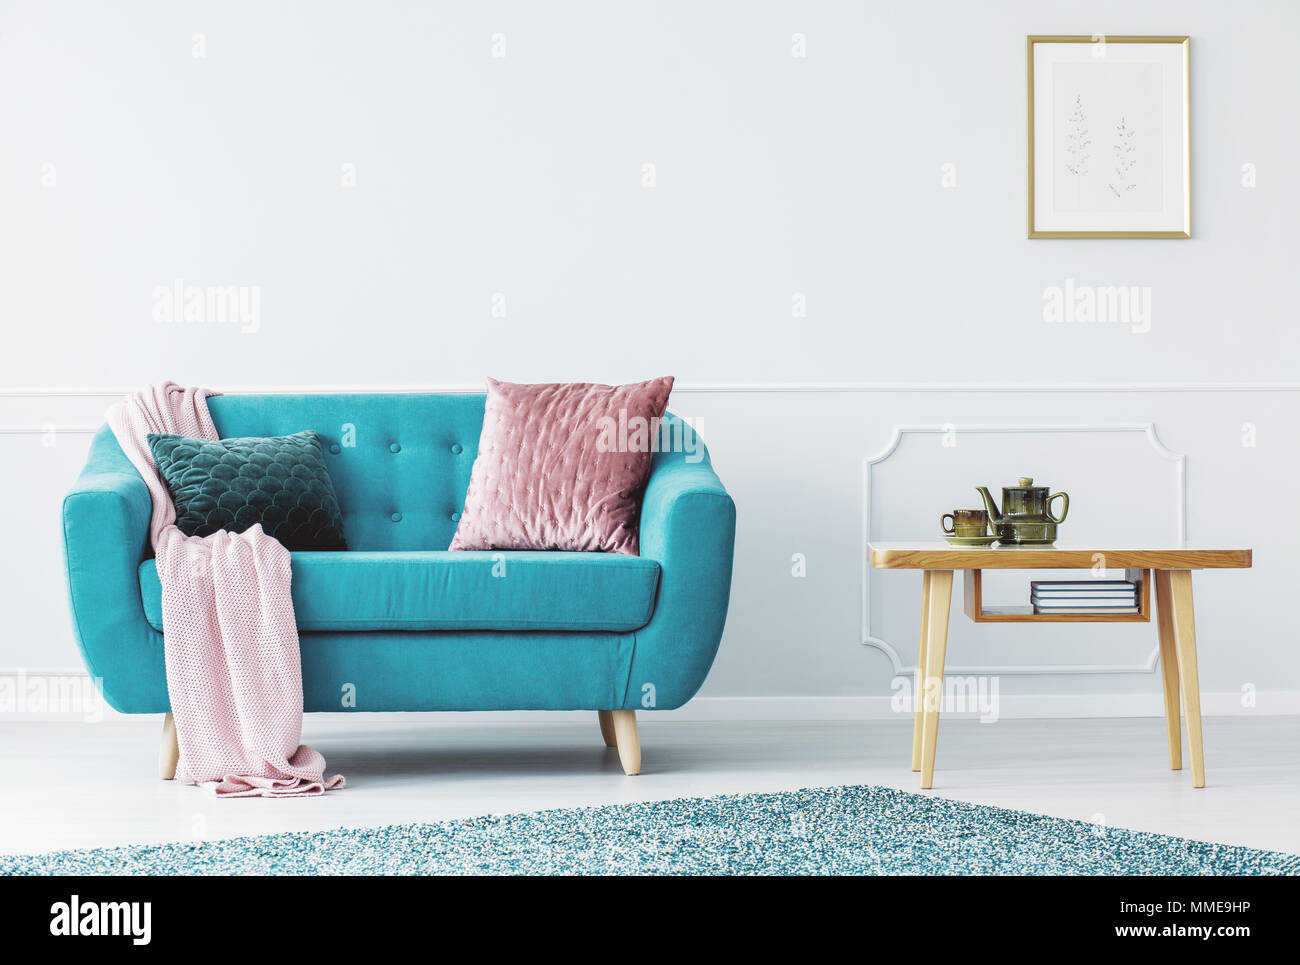 Blue sofa with pastel pink blanket and two pillows standing in bright  living room interior with wall molding Stock Photo - Alamy